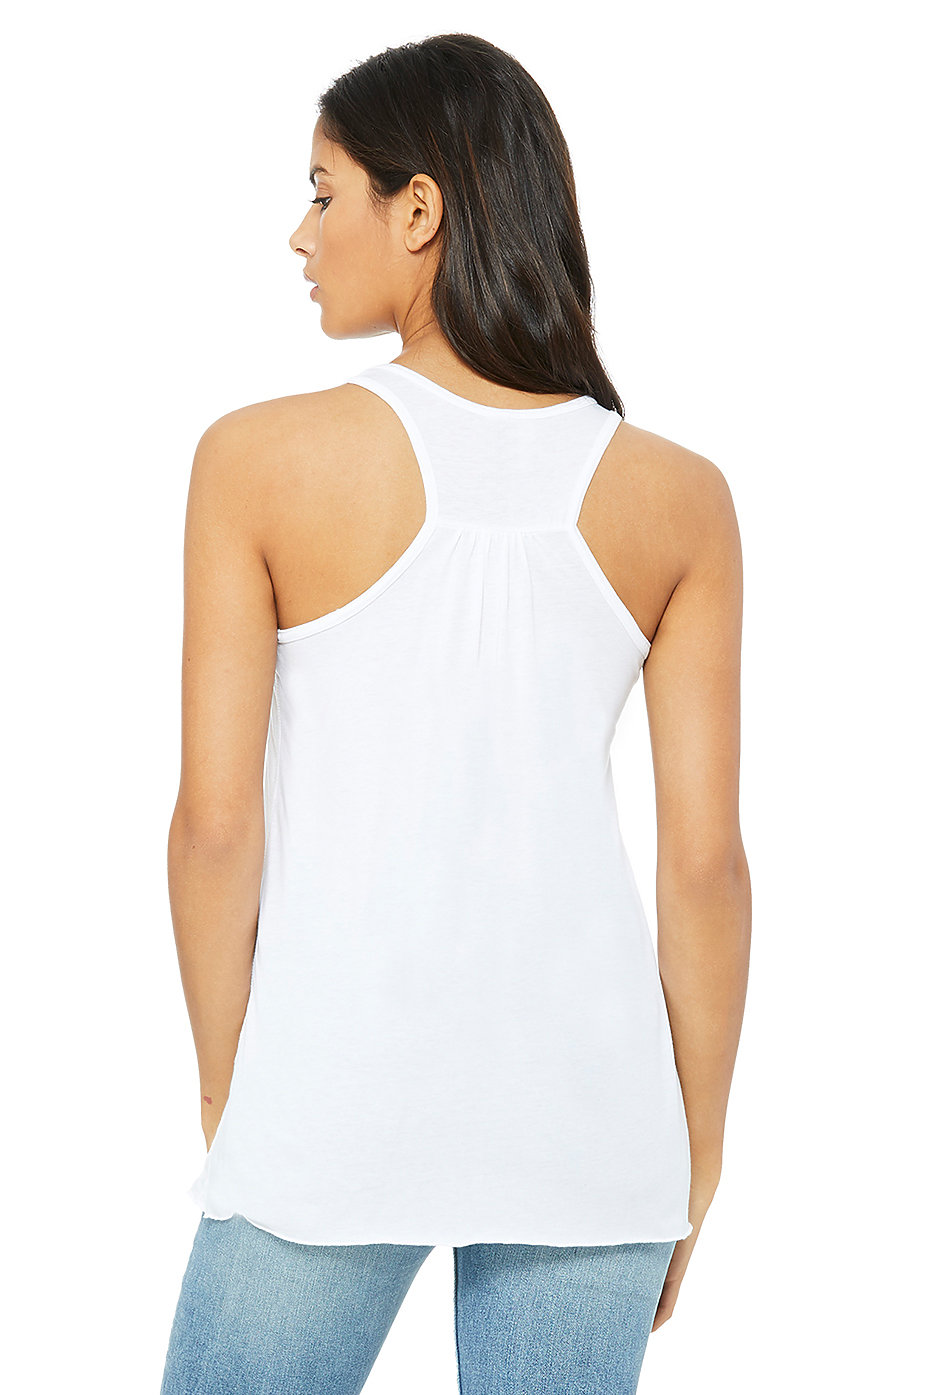 Download 46+ Womens Heather Racerback Tank Top Mockup Front View ...